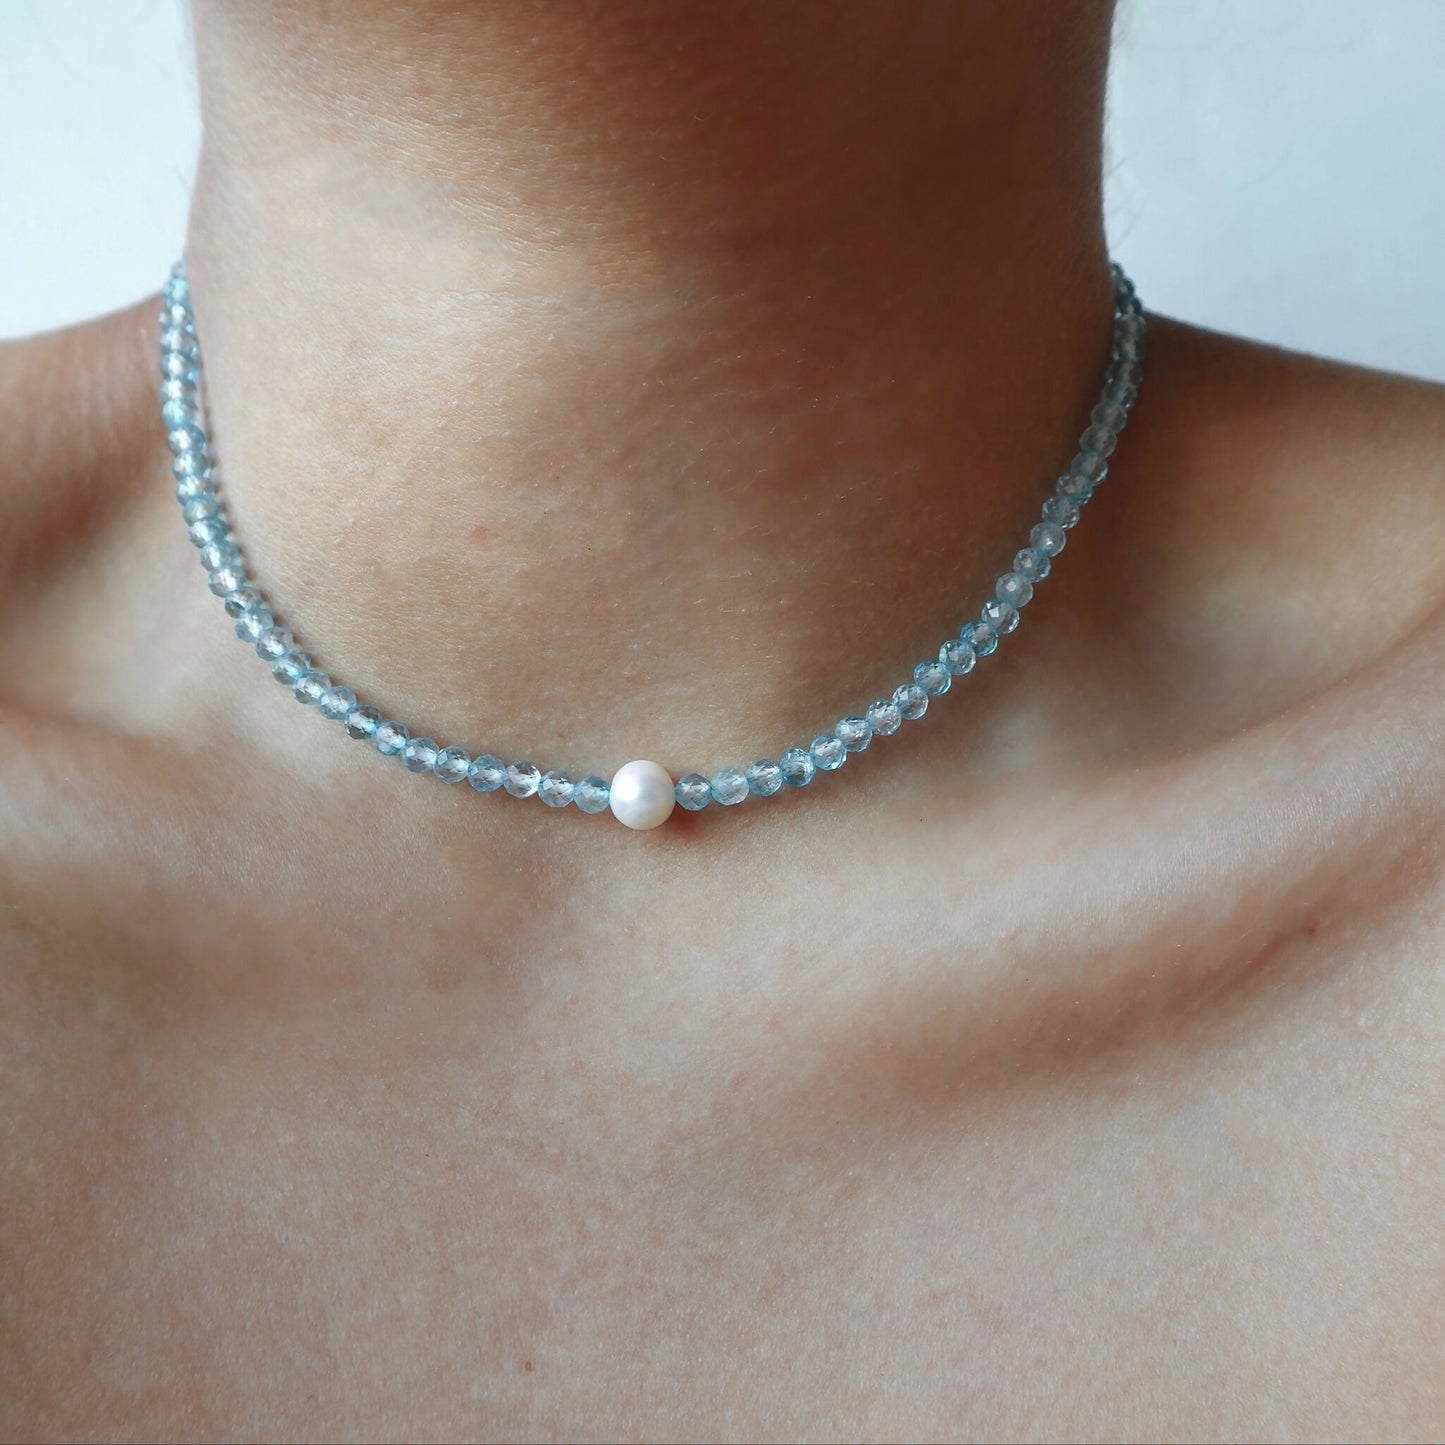 Necklace with natural topaz in silver tone